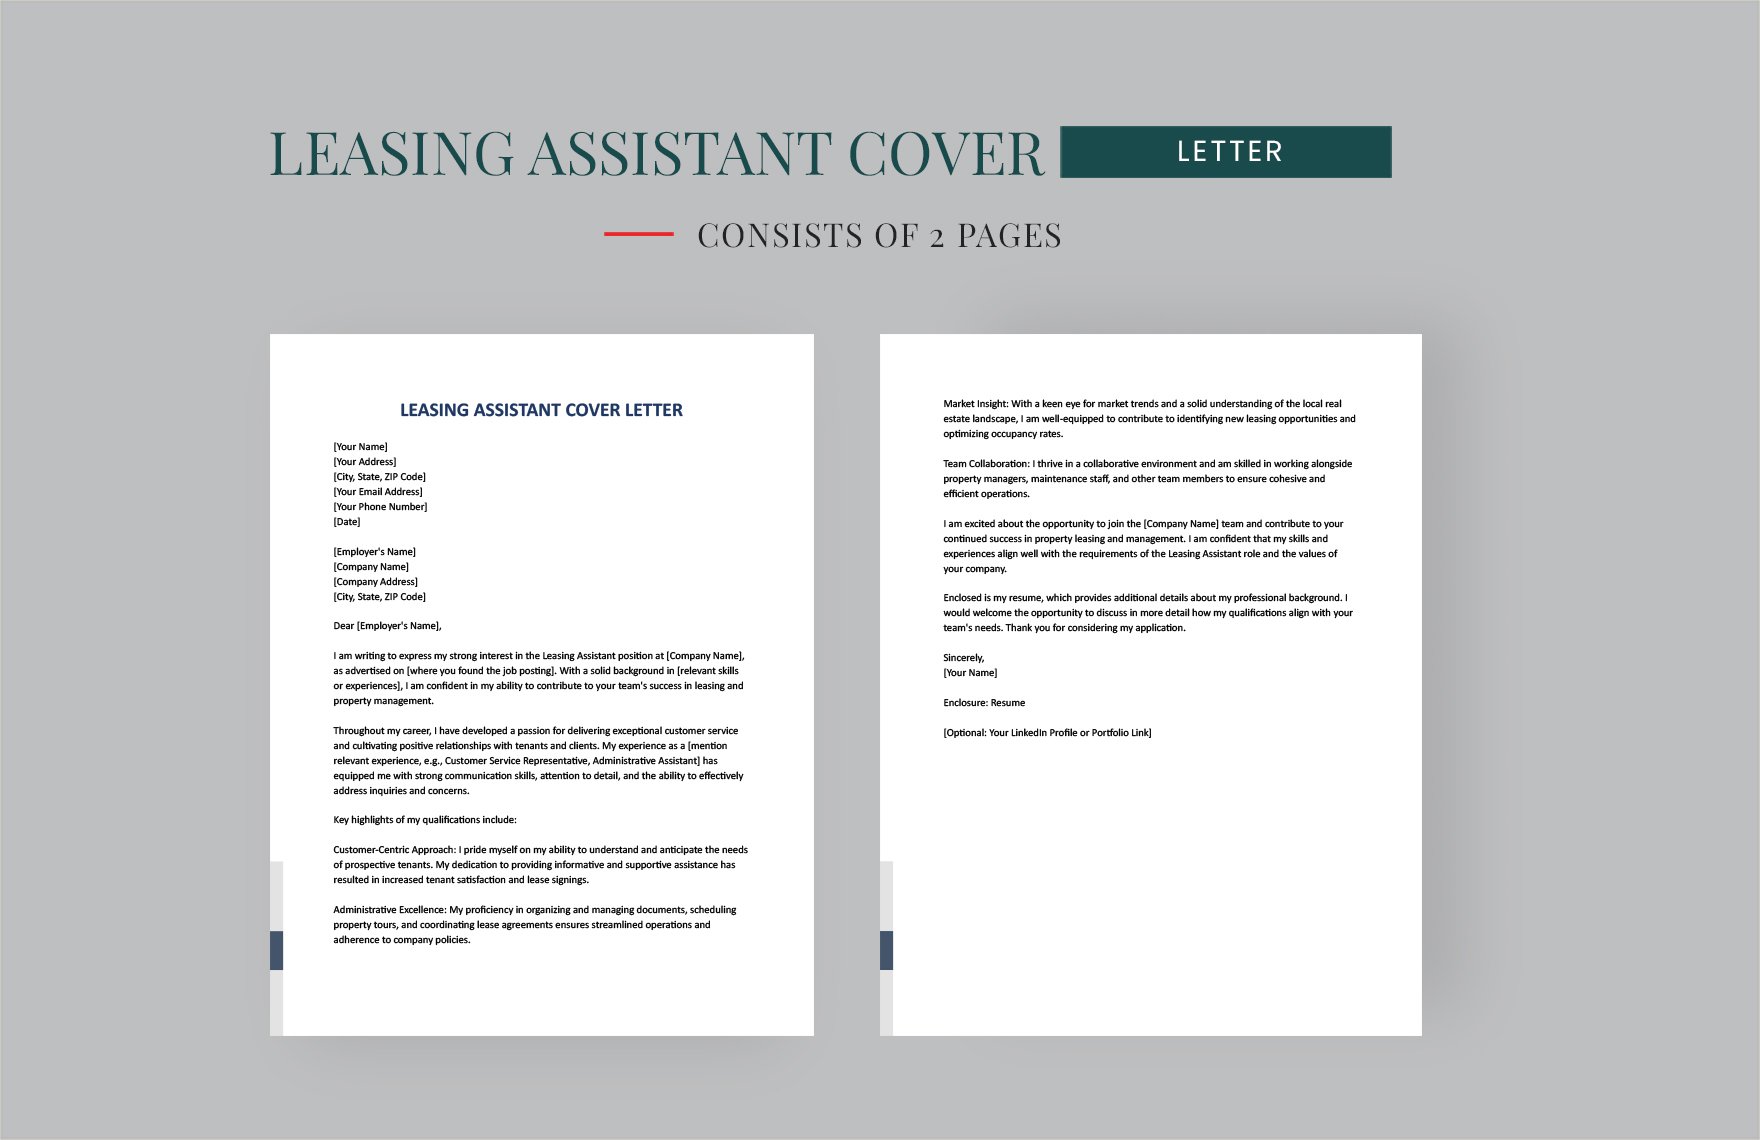 Leasing Assistant Cover Letter